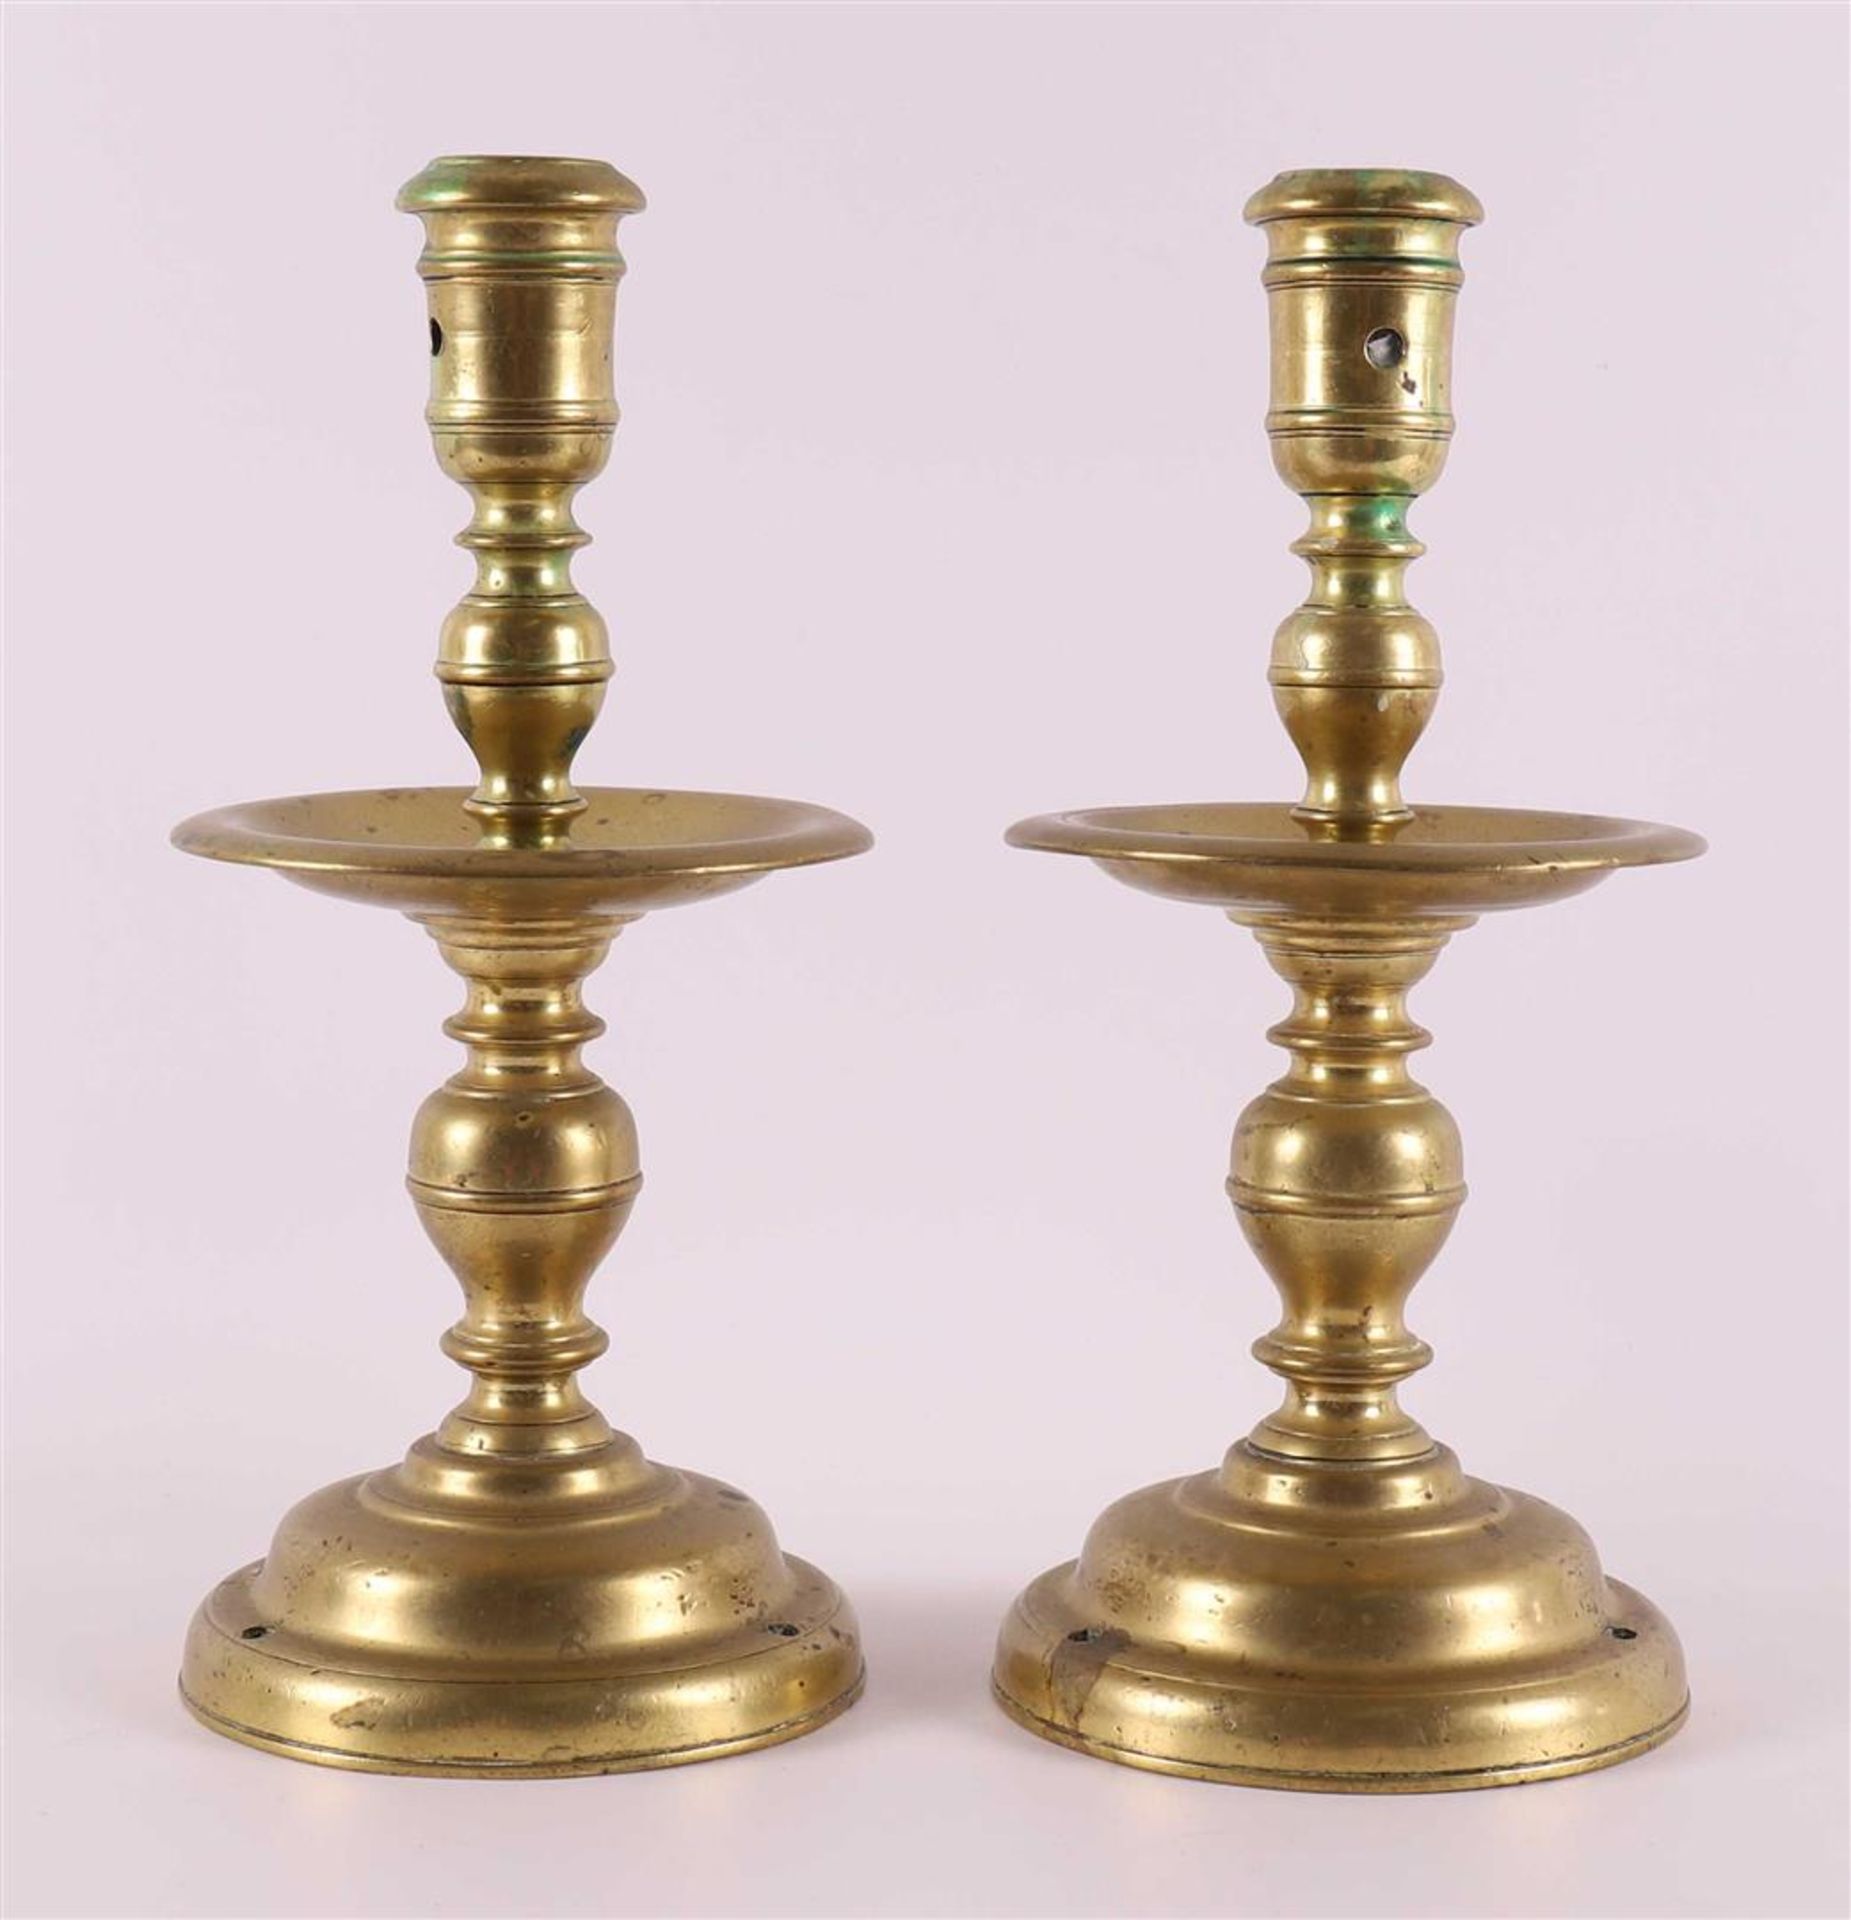 A pair of bronze collar candlesticks, 17th century. - Image 2 of 4